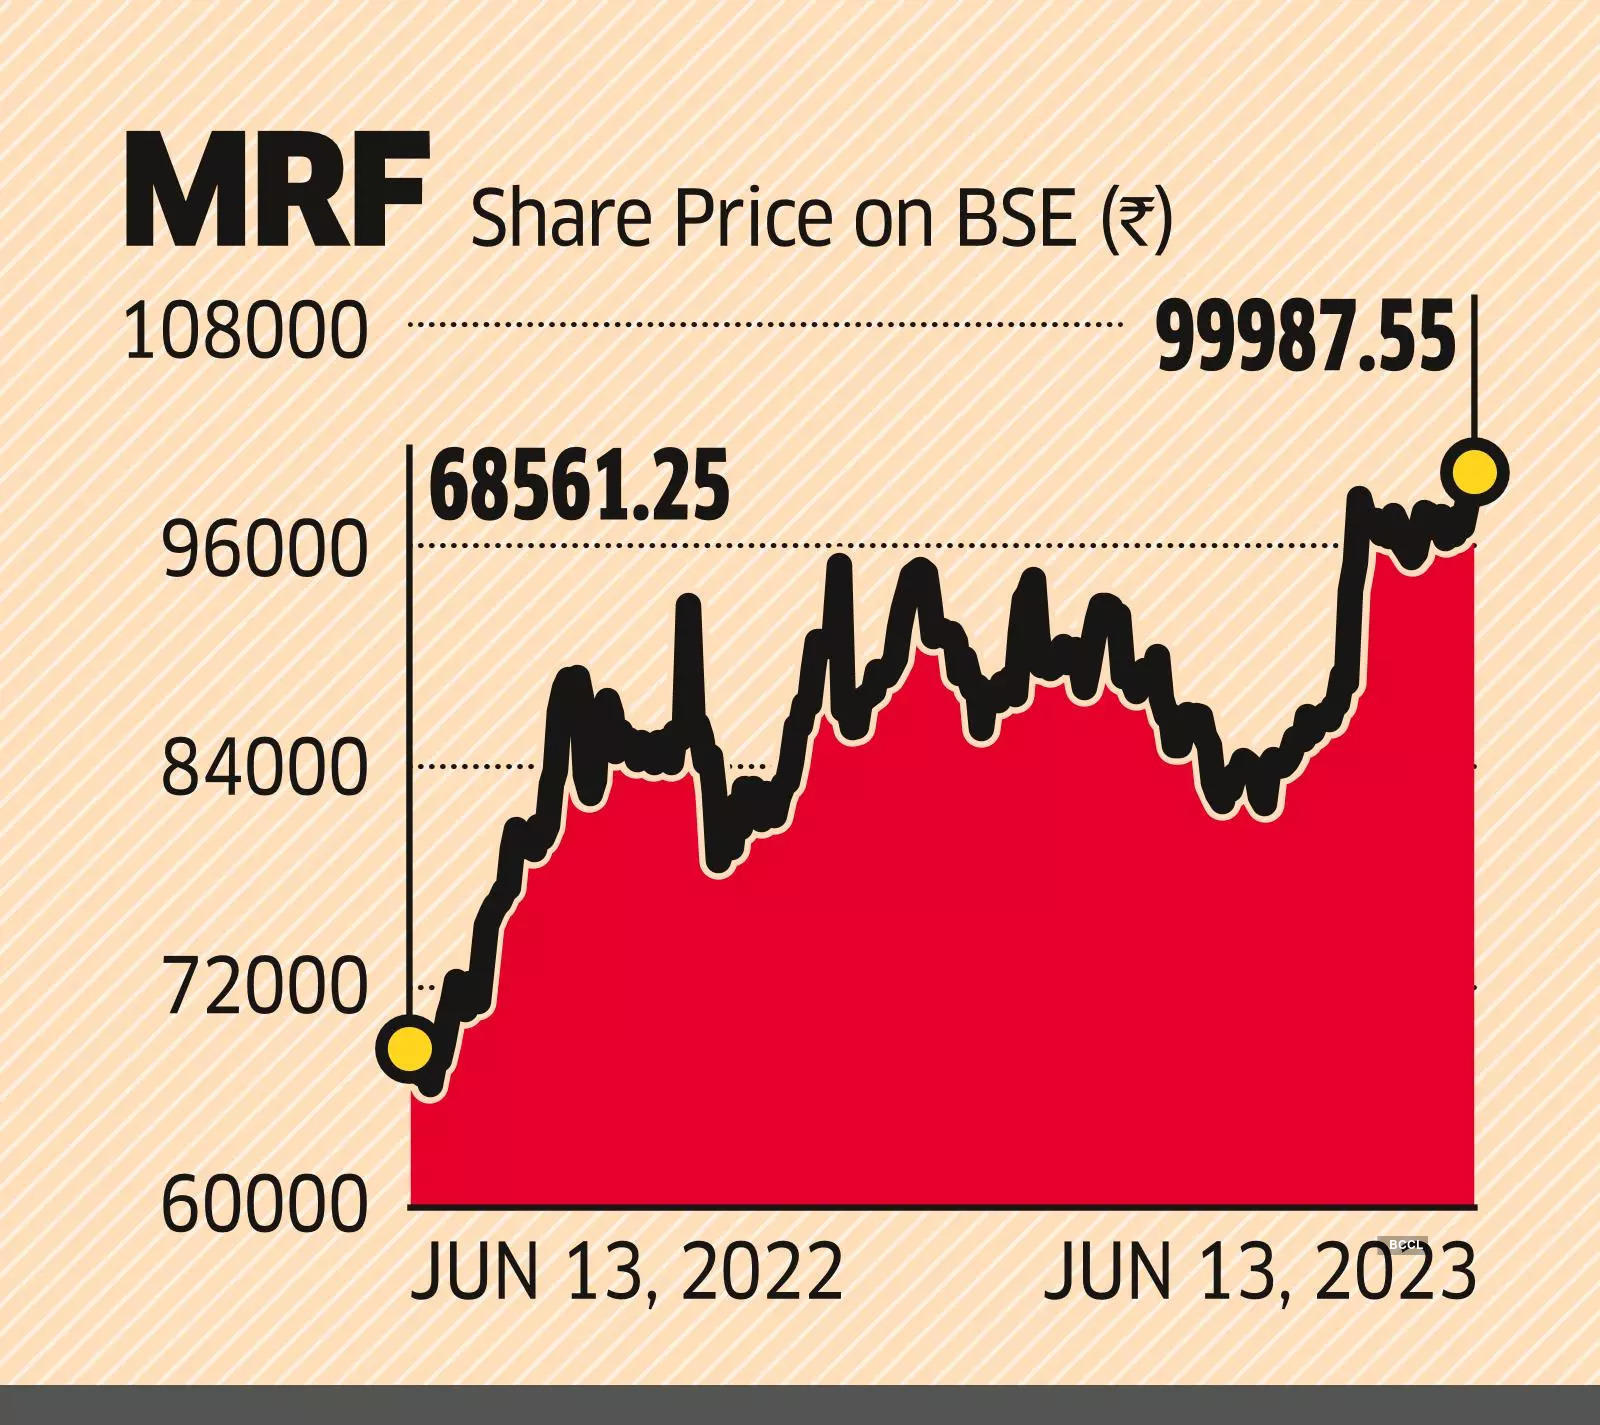 Mrf Share Price Mrf Shares Become Indias First To Cross Rs 100000 Mark The Economic Times 6401